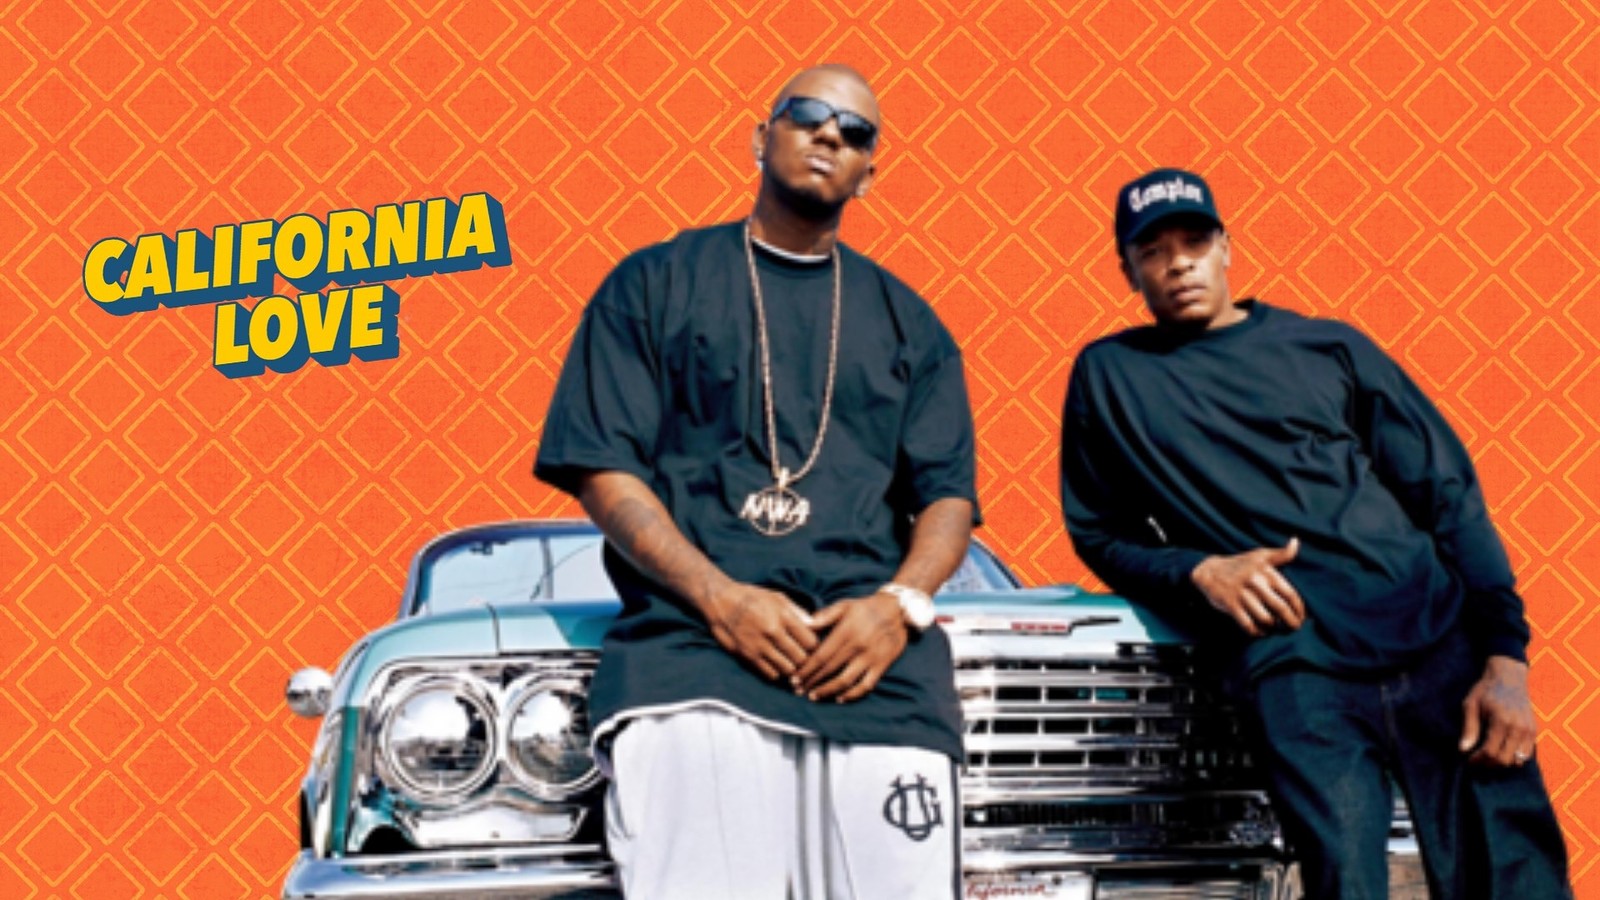 California Love: 90s/00s Hip Hop and R&B at The Lanes